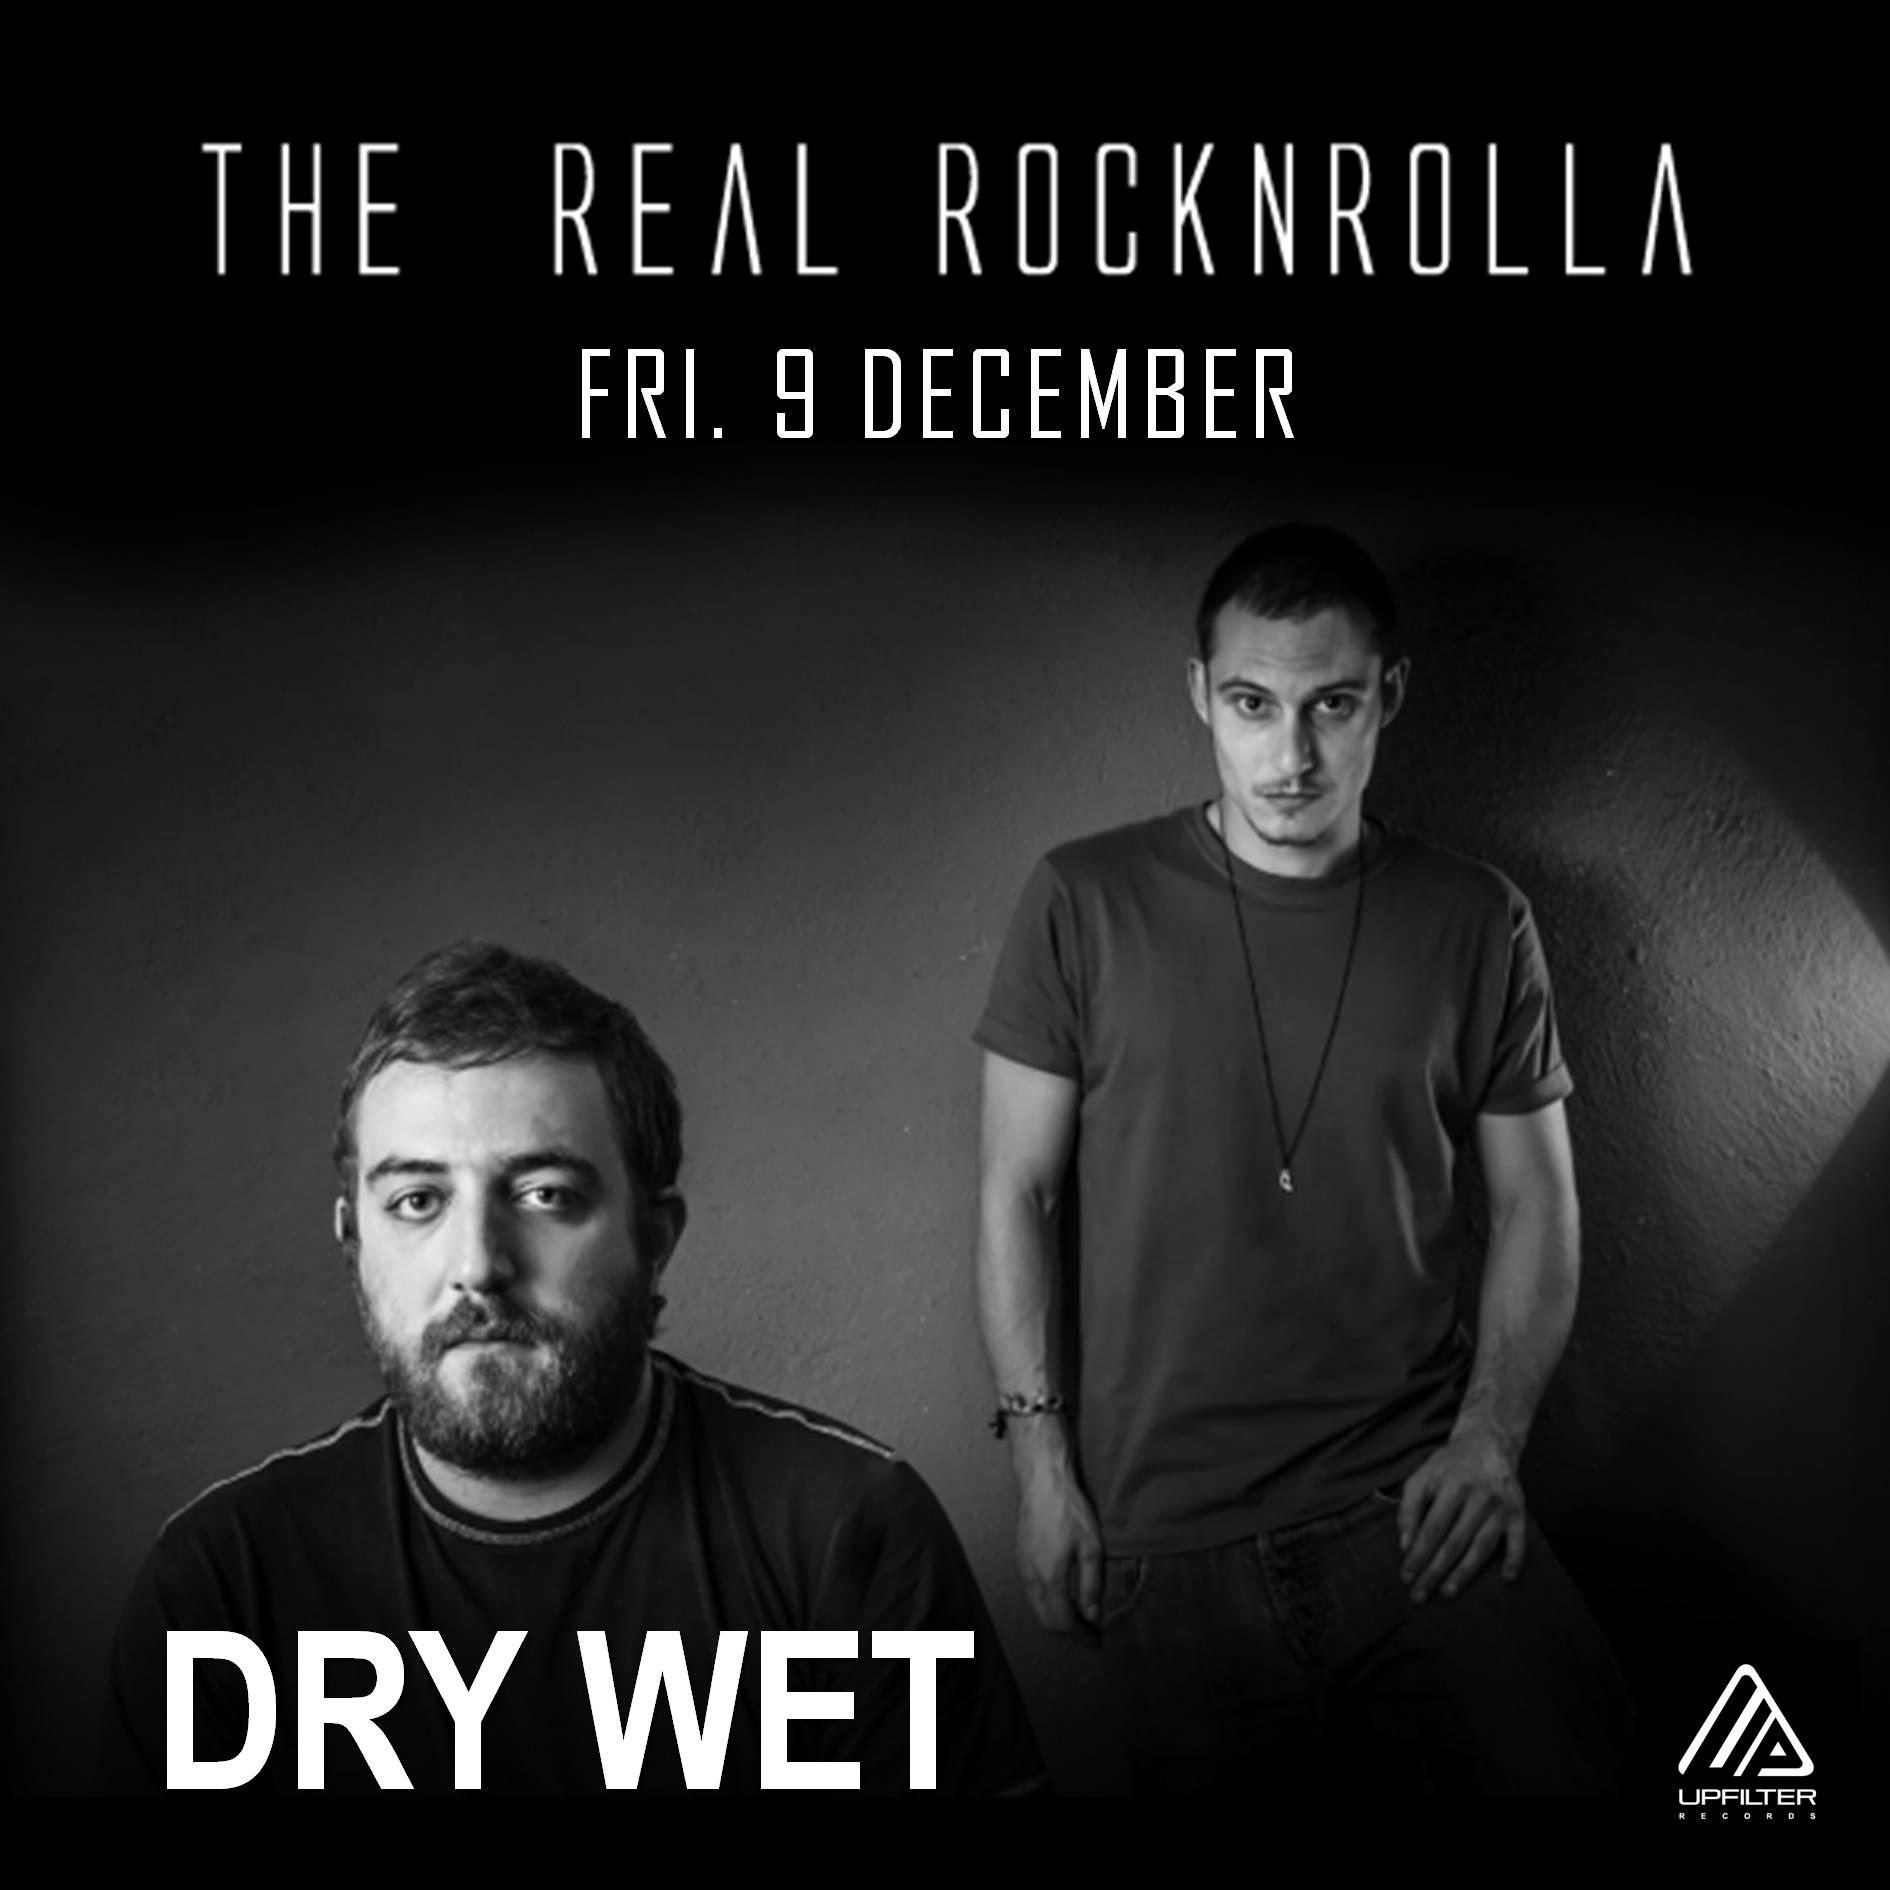 dry-wet-the-real-rocknrolla-poster-9-12